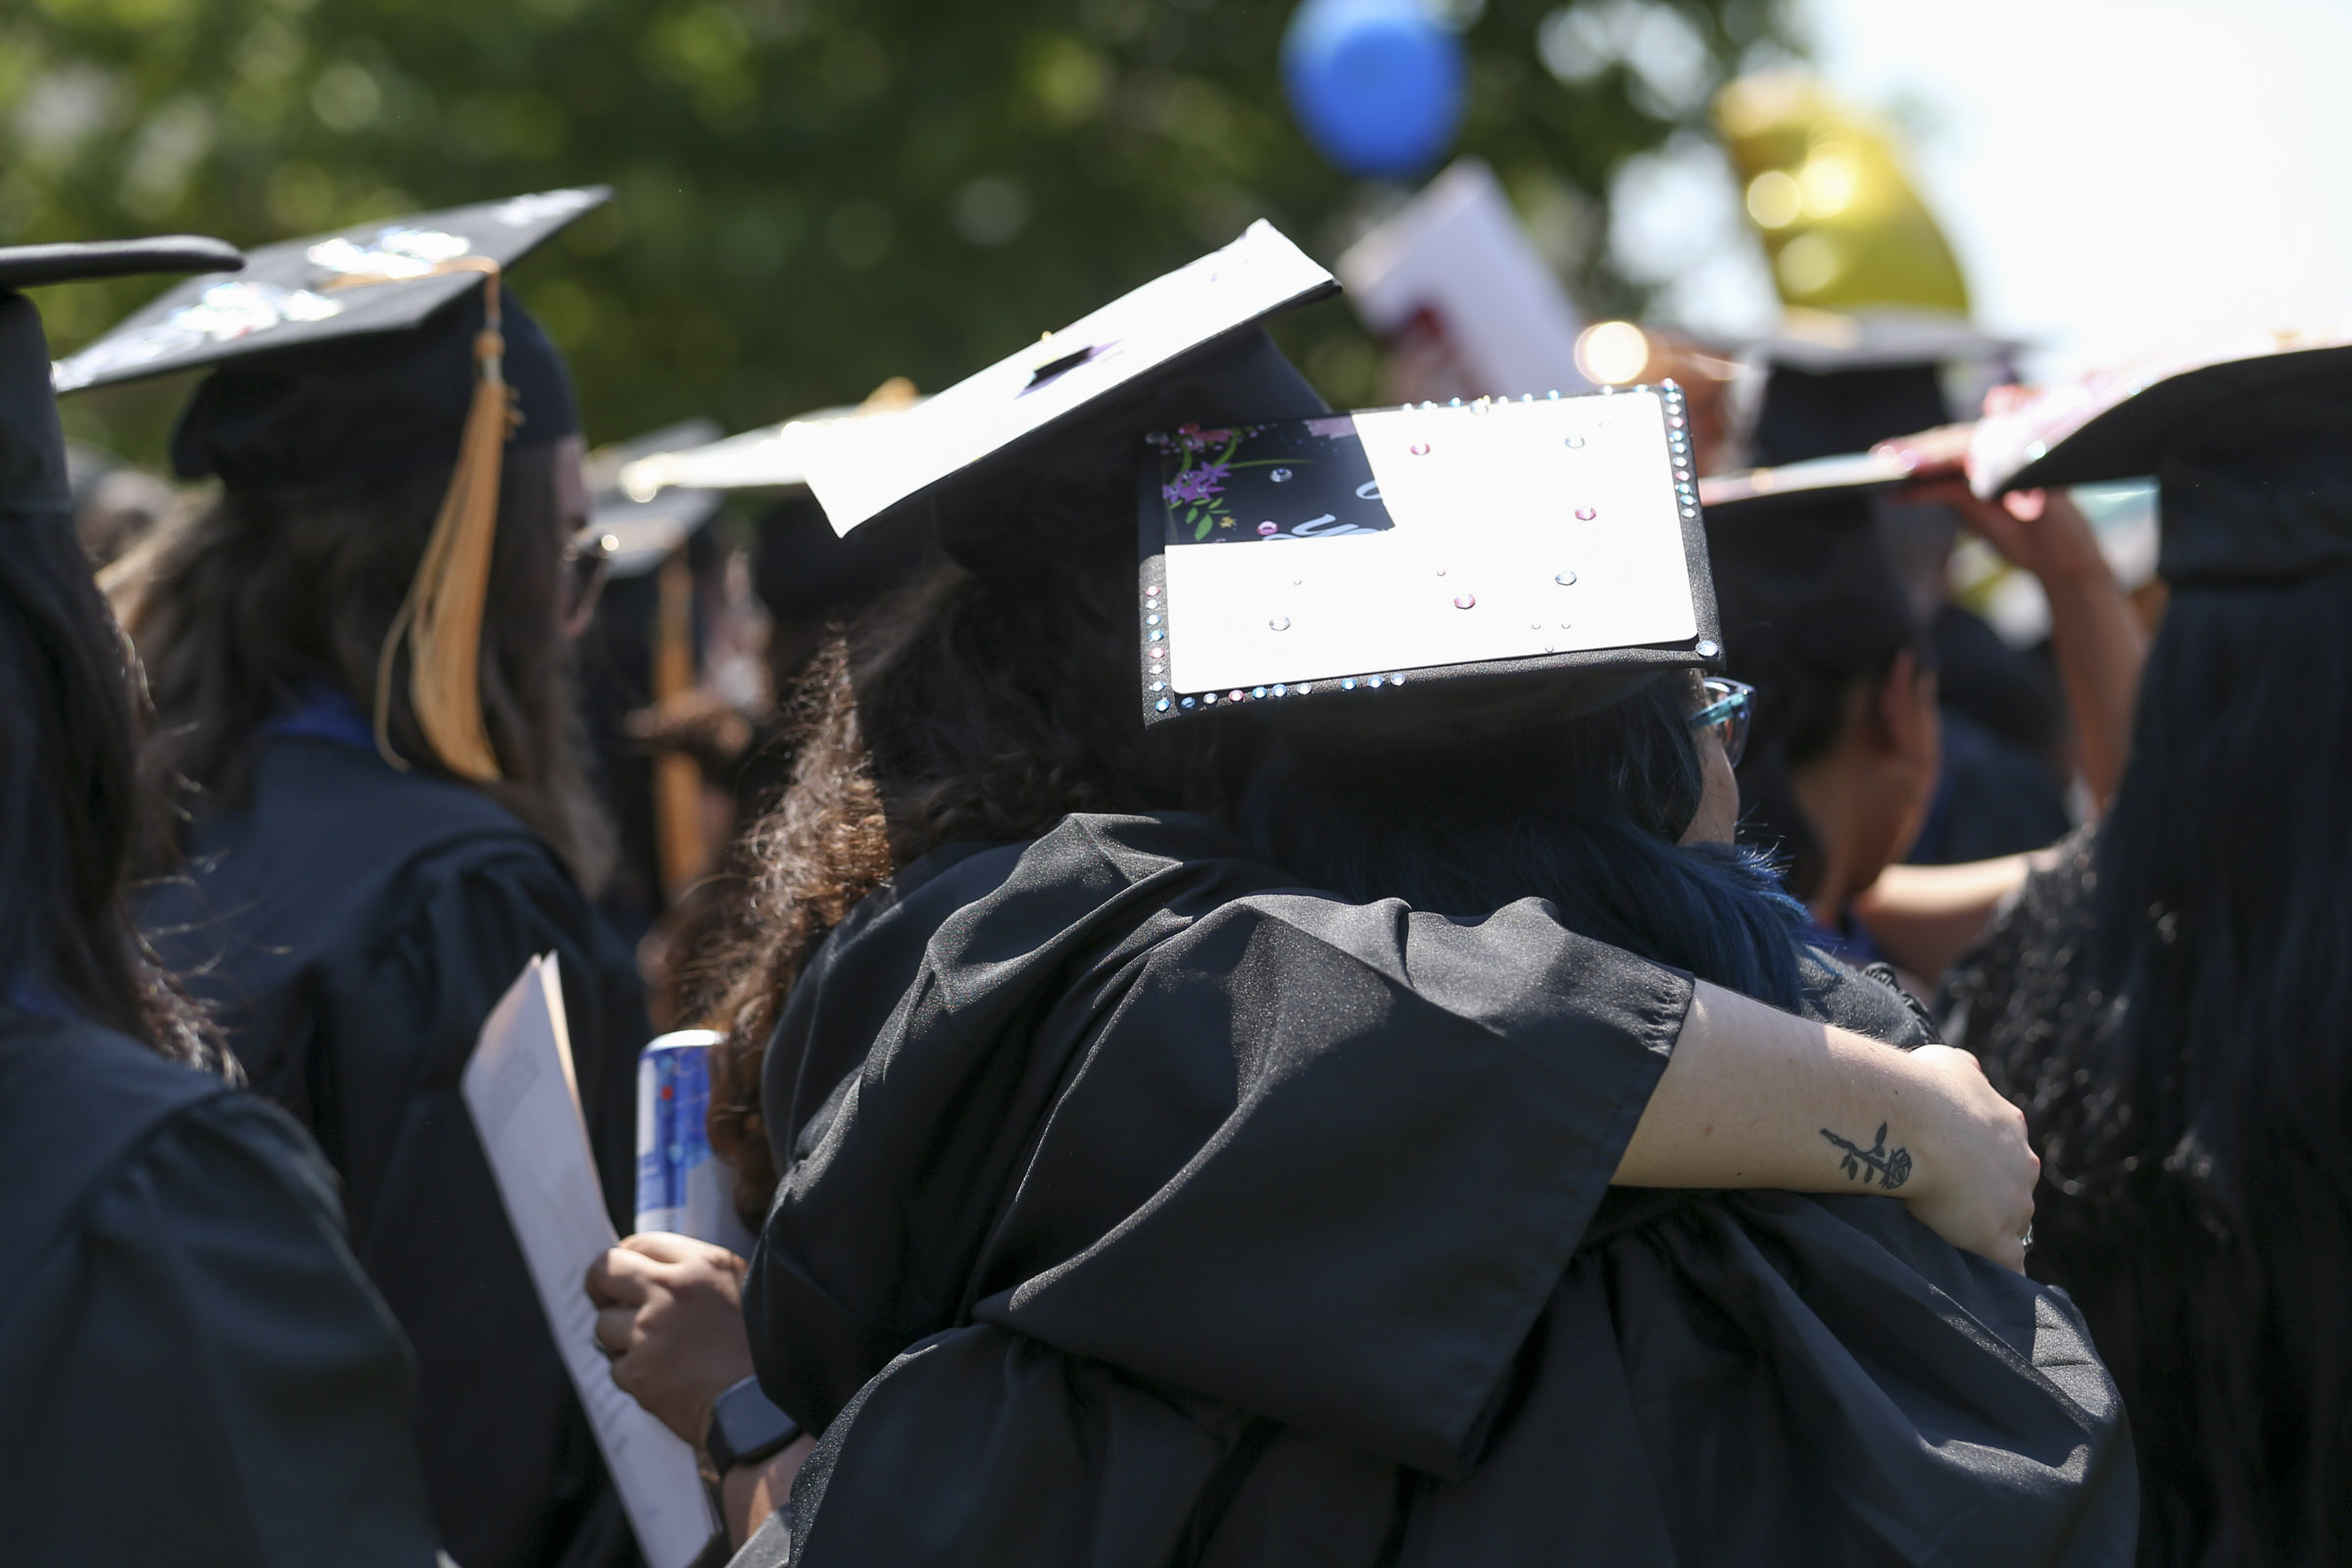 Two students hold each other in a tight embrace as their mortar boards catch the bright sun.